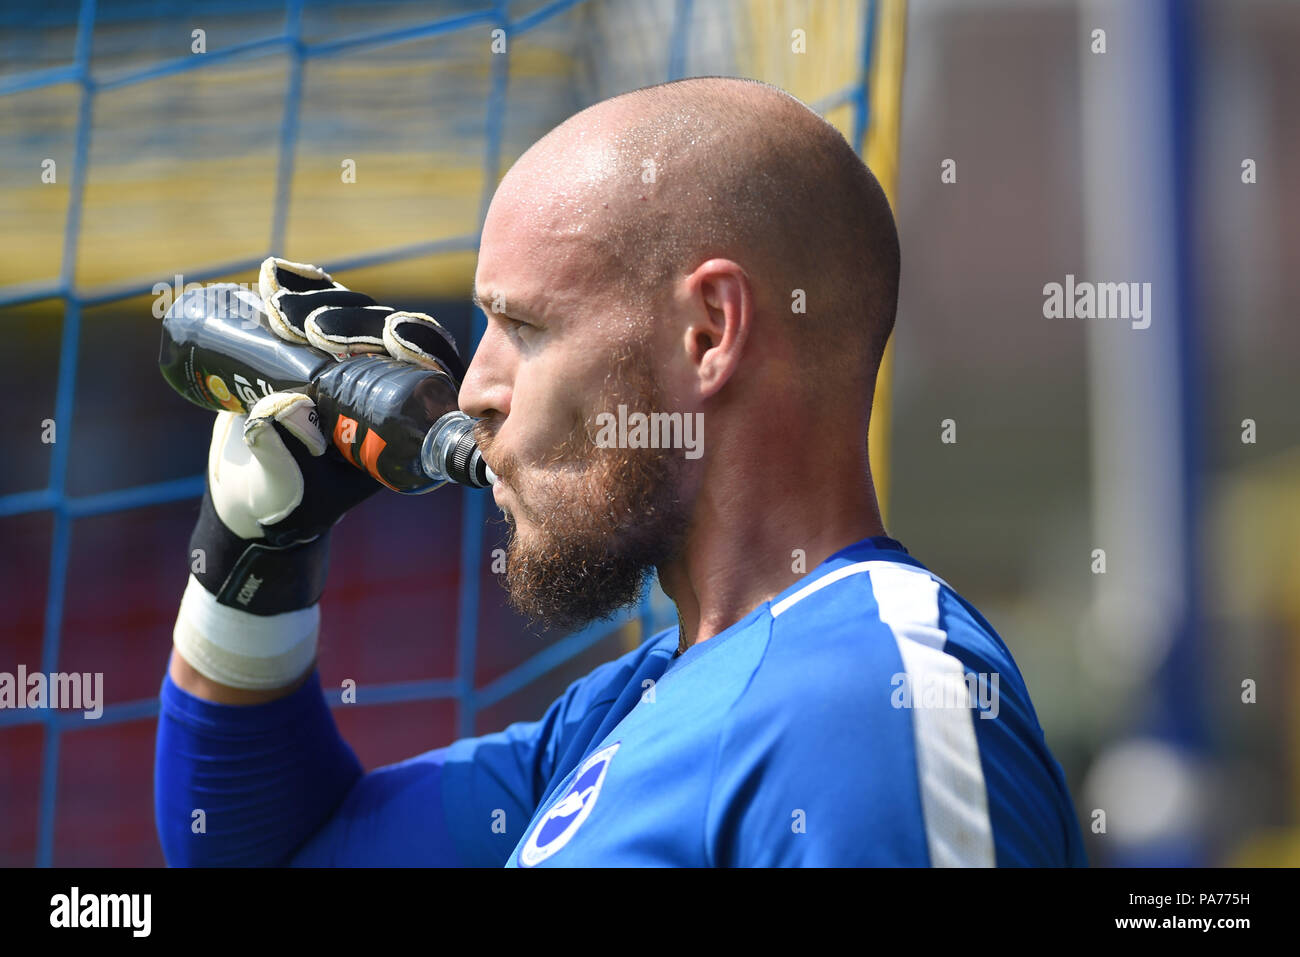 Kingston London UK 21st July 2018 - Brighton's new goalkeeper David Button during the pre season friendly football match between AFC Wimbledon and Brighton and Hove Albion  at the Cherry Red Records Stadium in Kingston Surrey Photograph taken by Simon Dack Credit: Simon Dack/Alamy Live News - Editorial Use Only Stock Photo